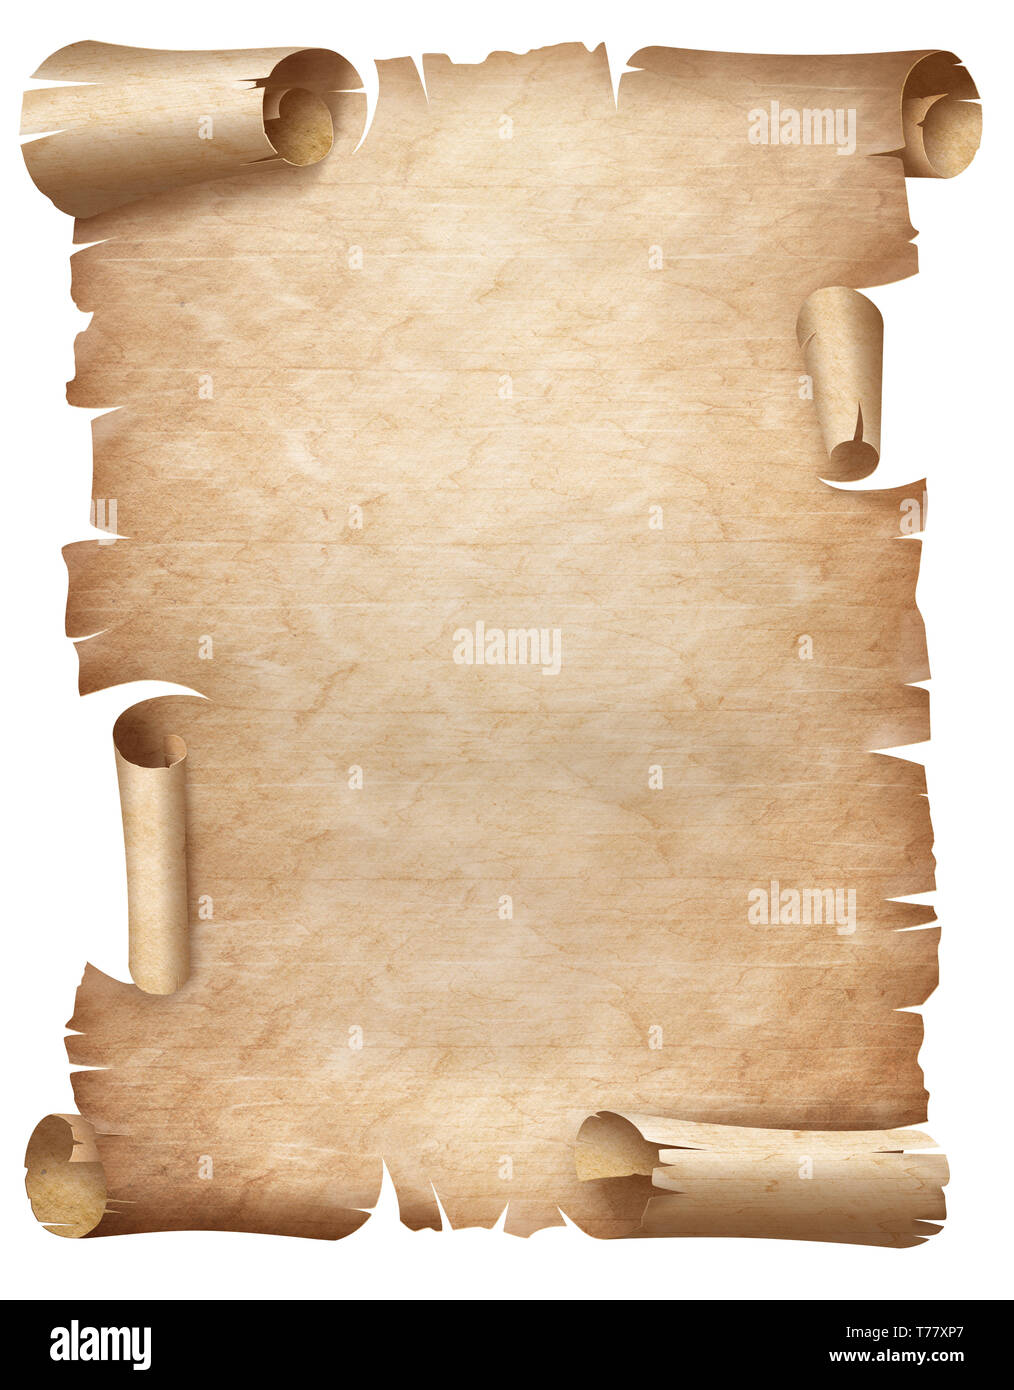 Vertical ancient worn parchment or old document isolated Stock Photo - Alamy